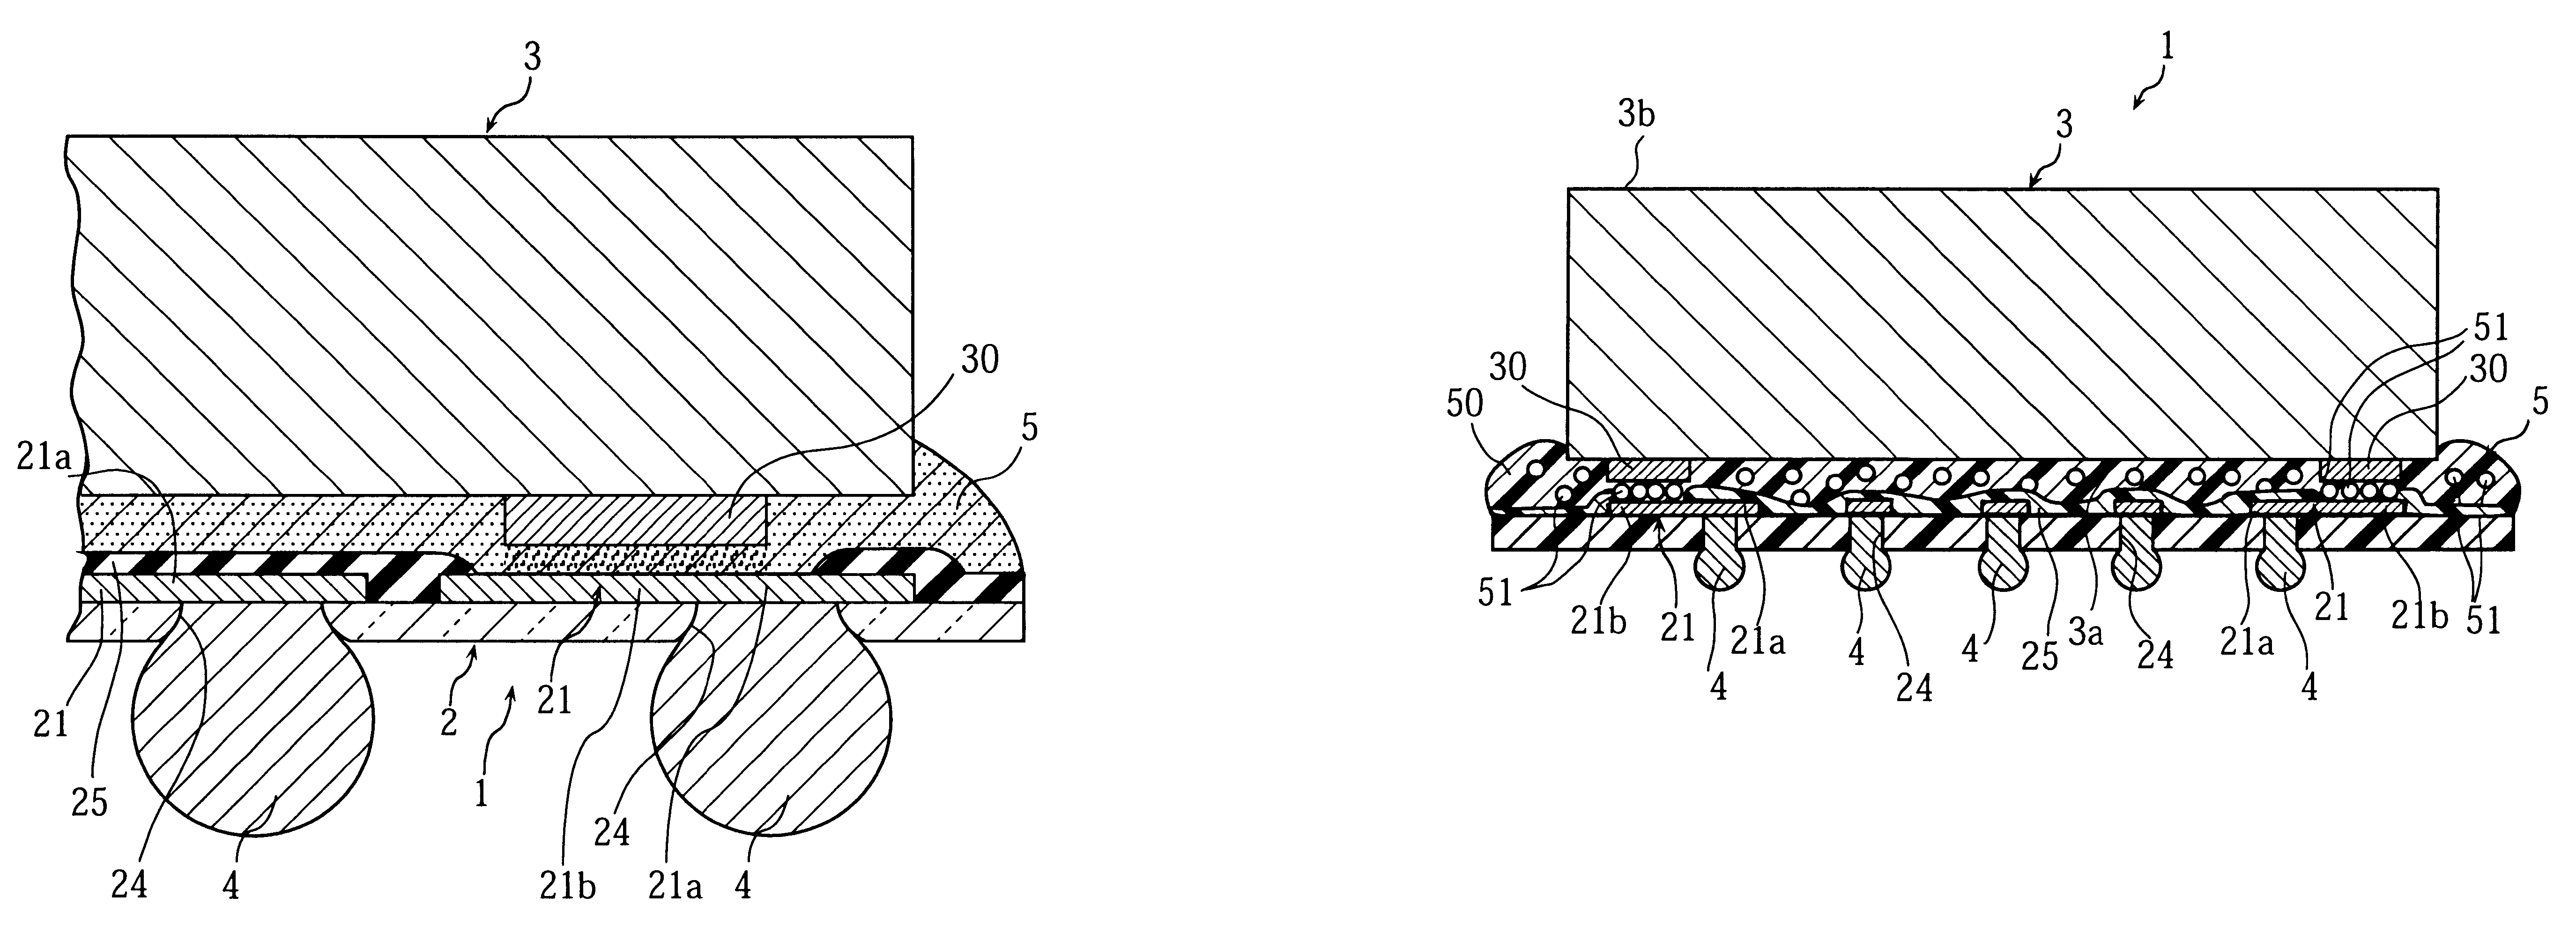 Semiconductor device and method for making the same